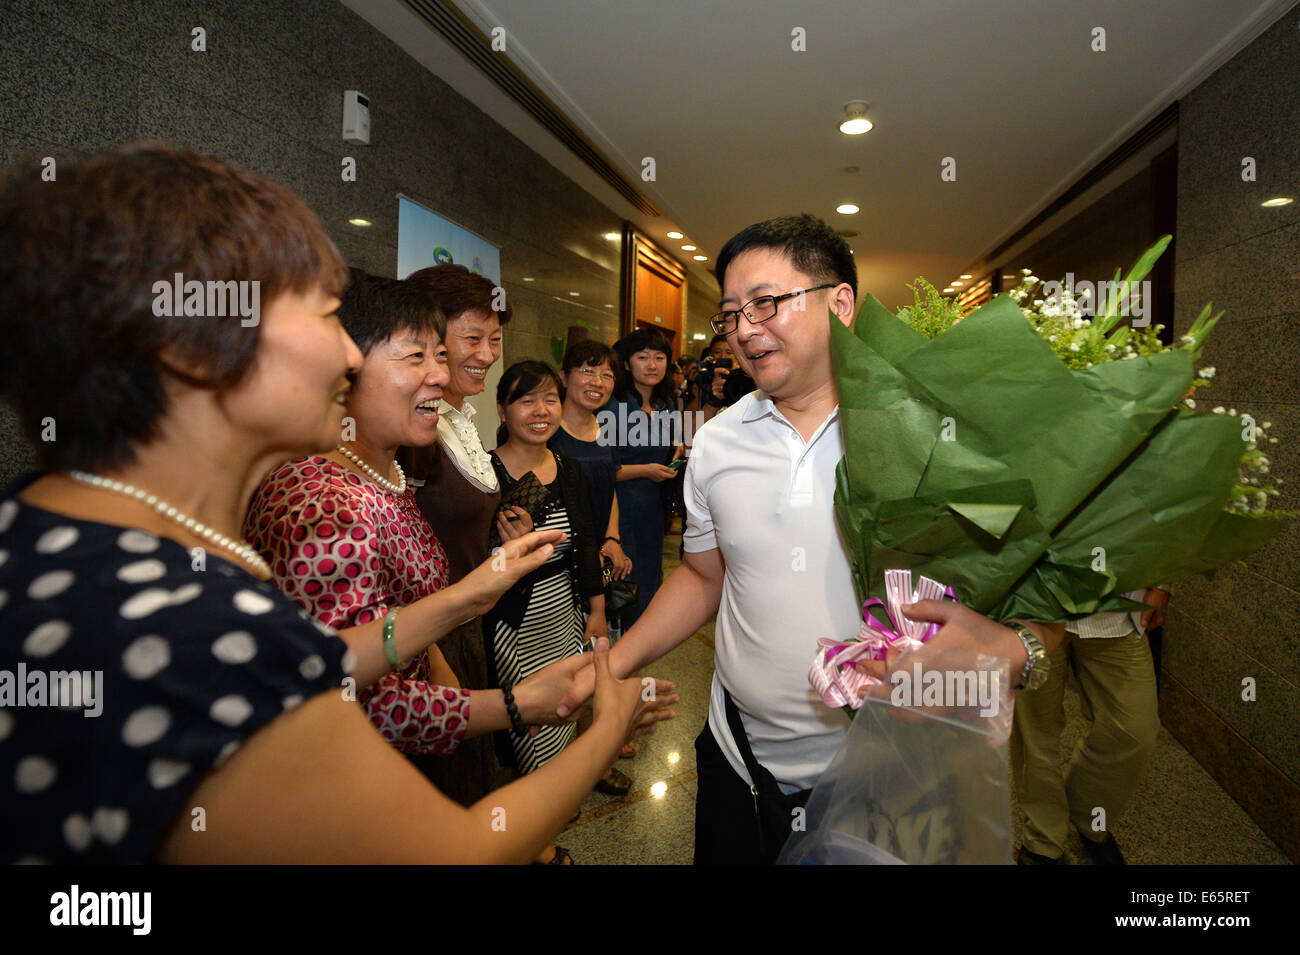 Beijing, China. 15th Aug, 2014. Li Xin (1st R), an expert on infectious ...